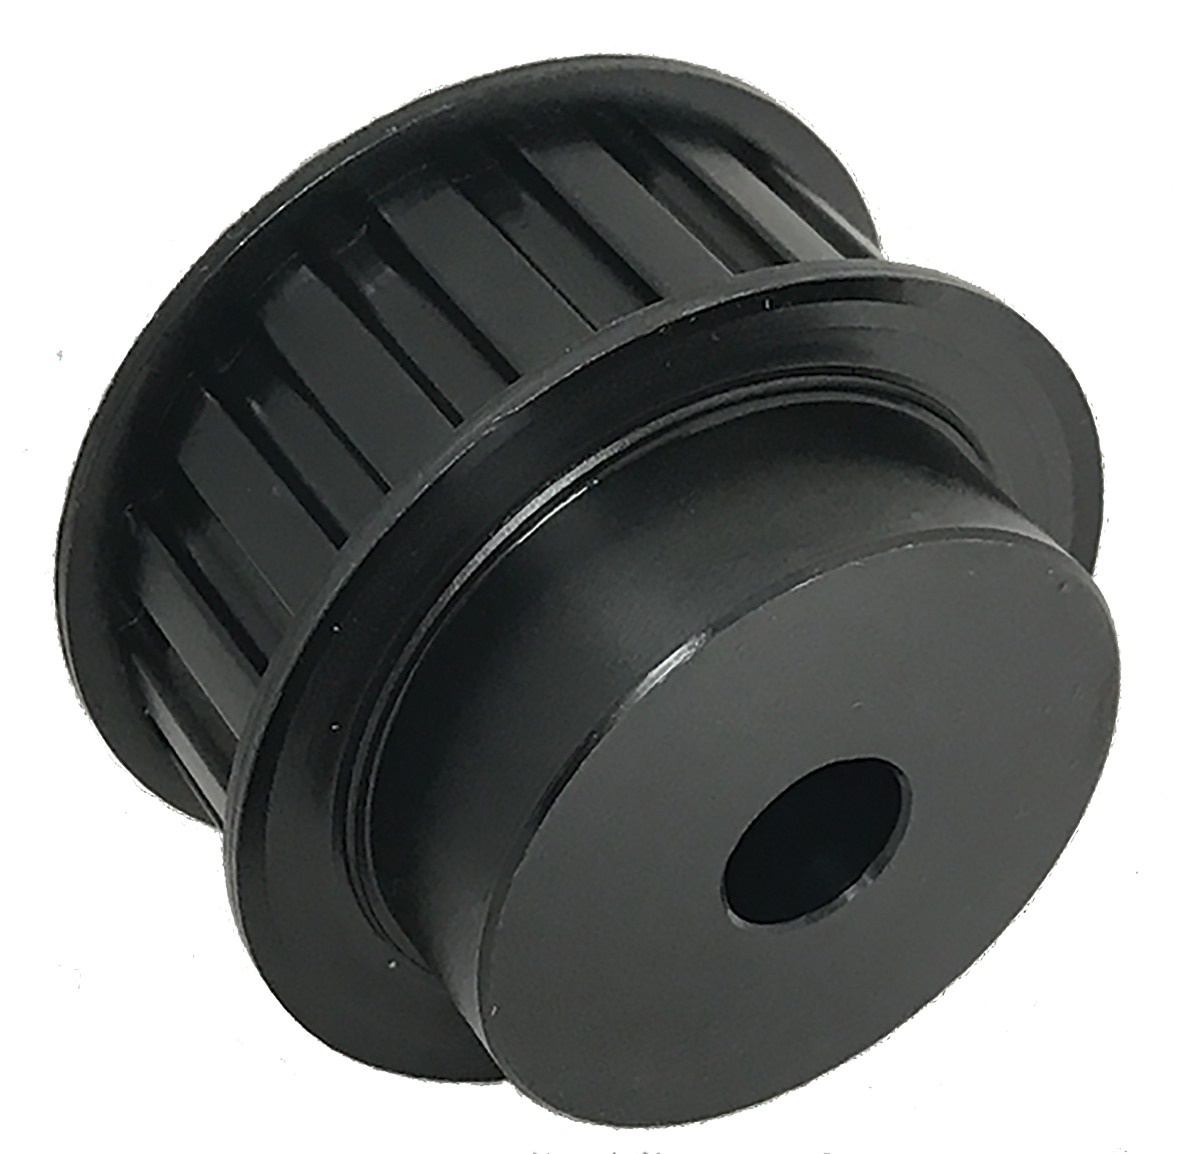 19H300-6FS8 - Steel Imperial Pitch Pulleys